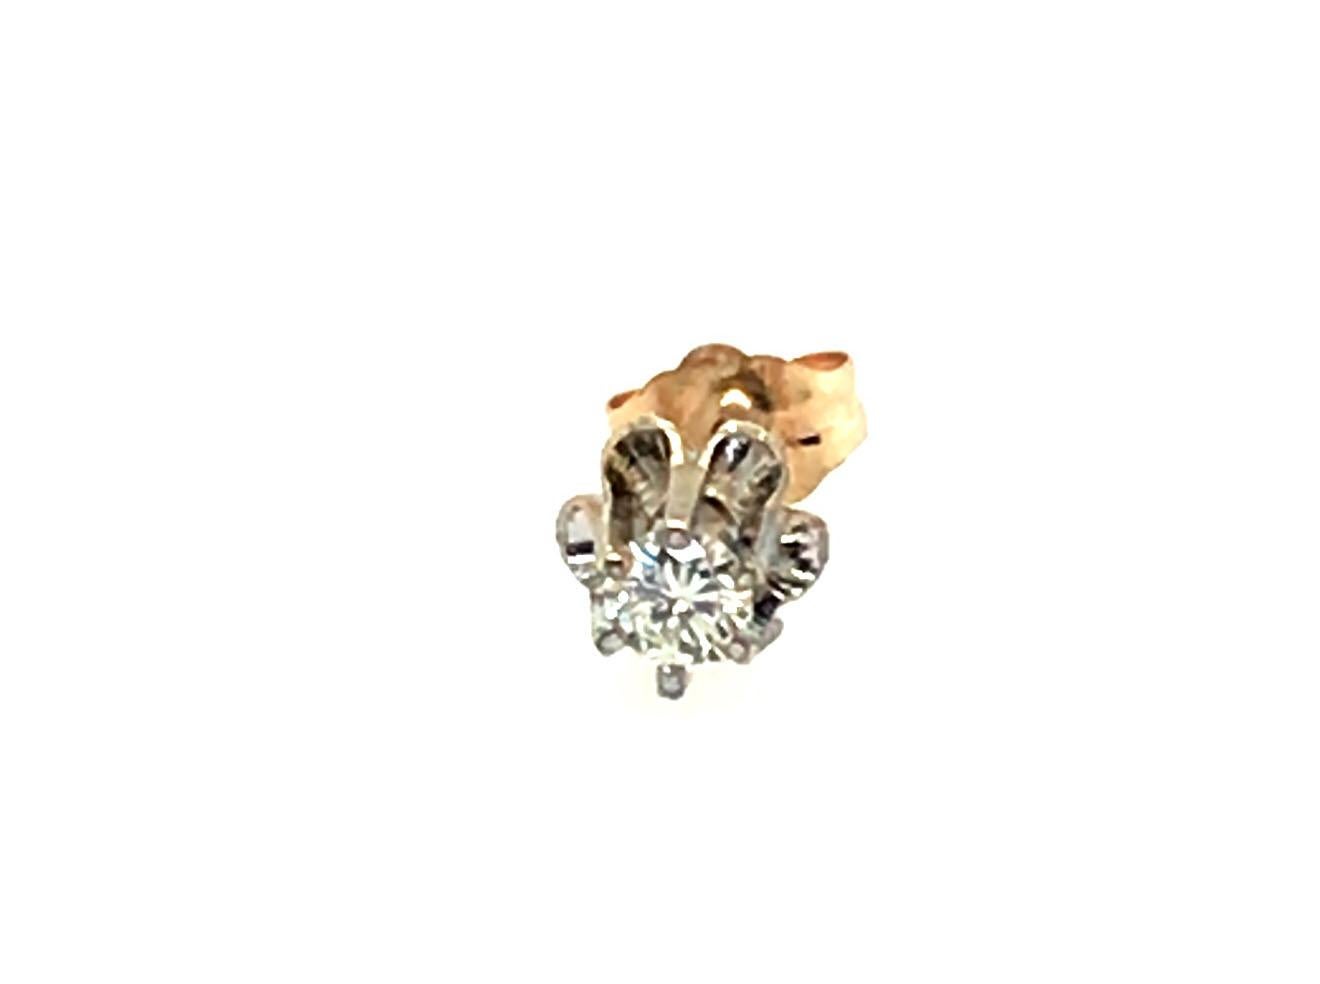 Single Diamond Stud Earring Buttercup .15ct Round Brilliant 14K White Gold


Features a Genuine Natural Mined F-G/VVS-VS .15ct Round Brilliant Cut Diamond 

100% Natural Diamond

.15 Carat Diamond Weight 

Solid 14K White Gold

Guaranteed to Be